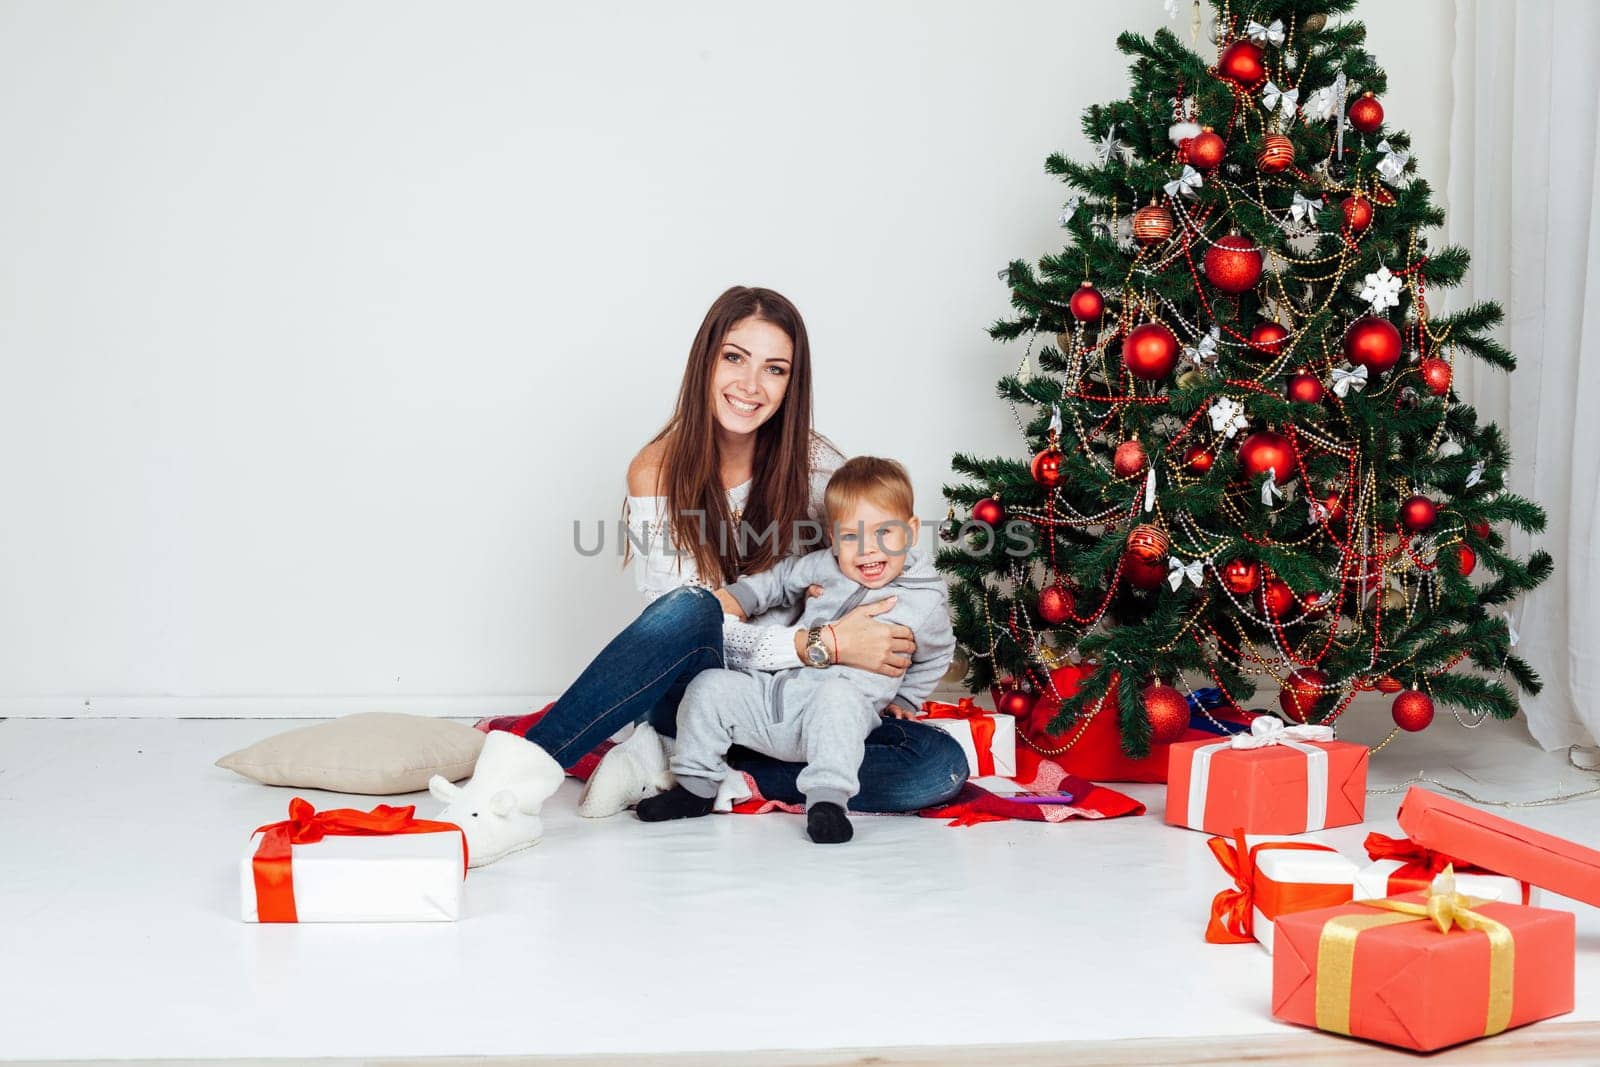 mother and young son Christmas Decor new year 2018 2019